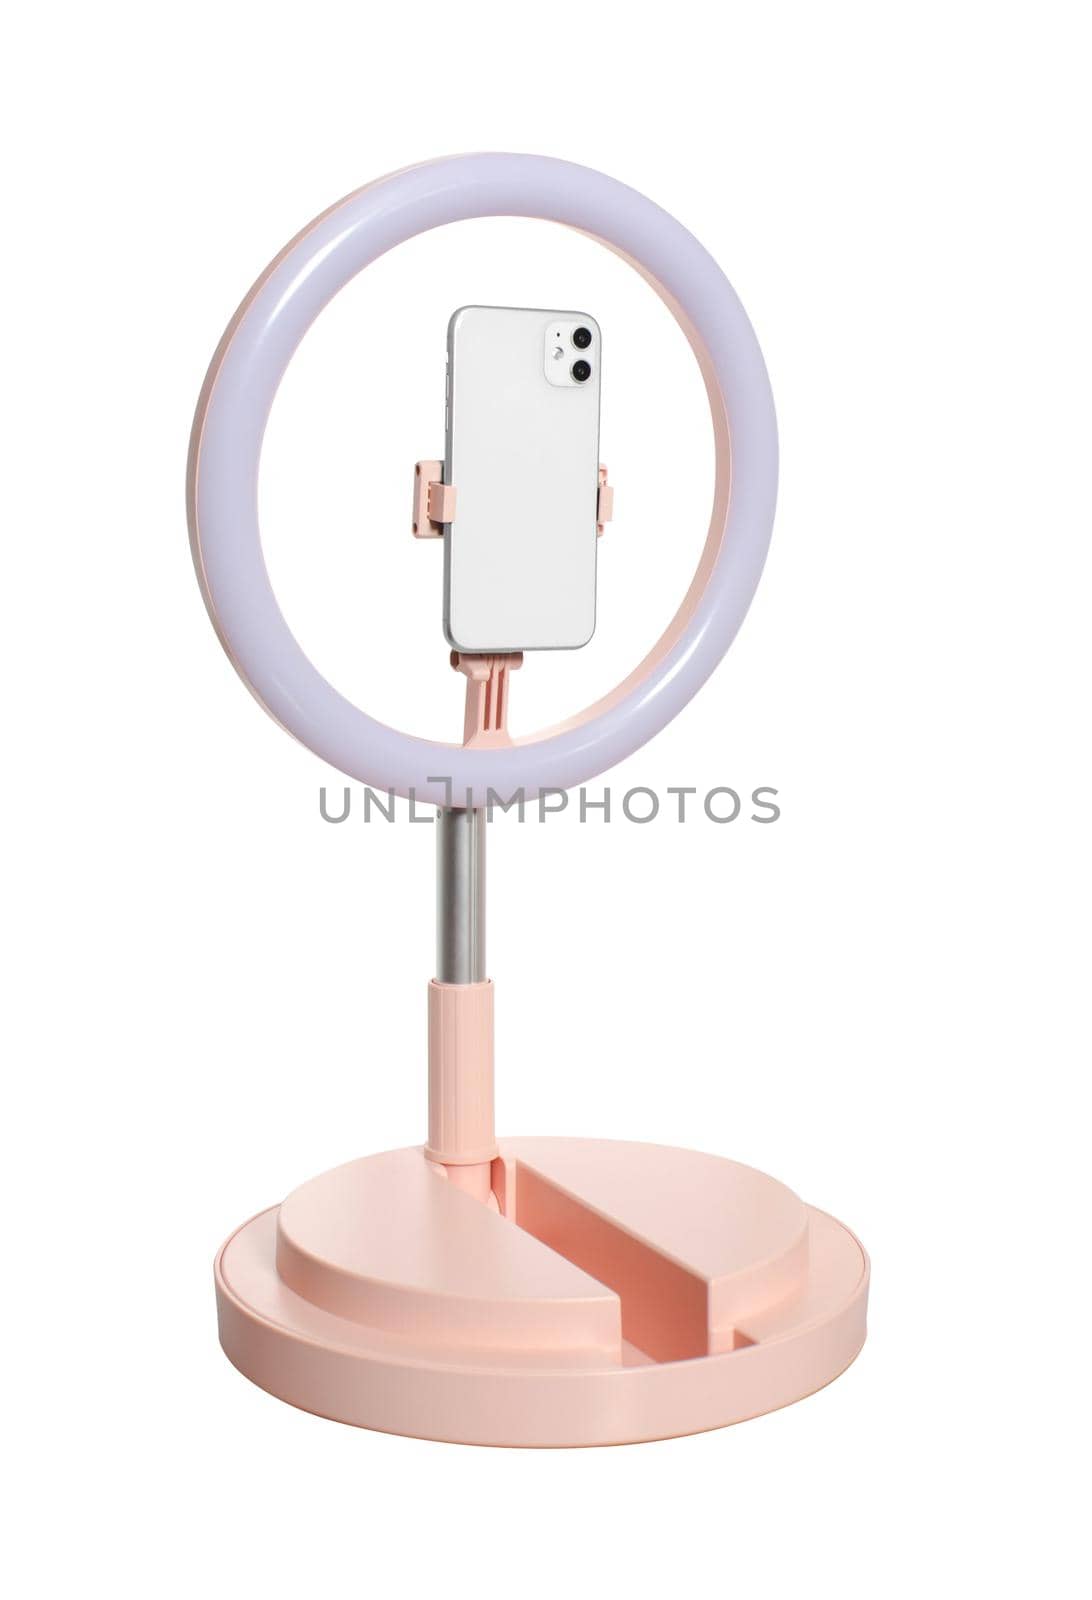 selfie ring lamp with smartphone holder, on stand isolated on white background by A_A